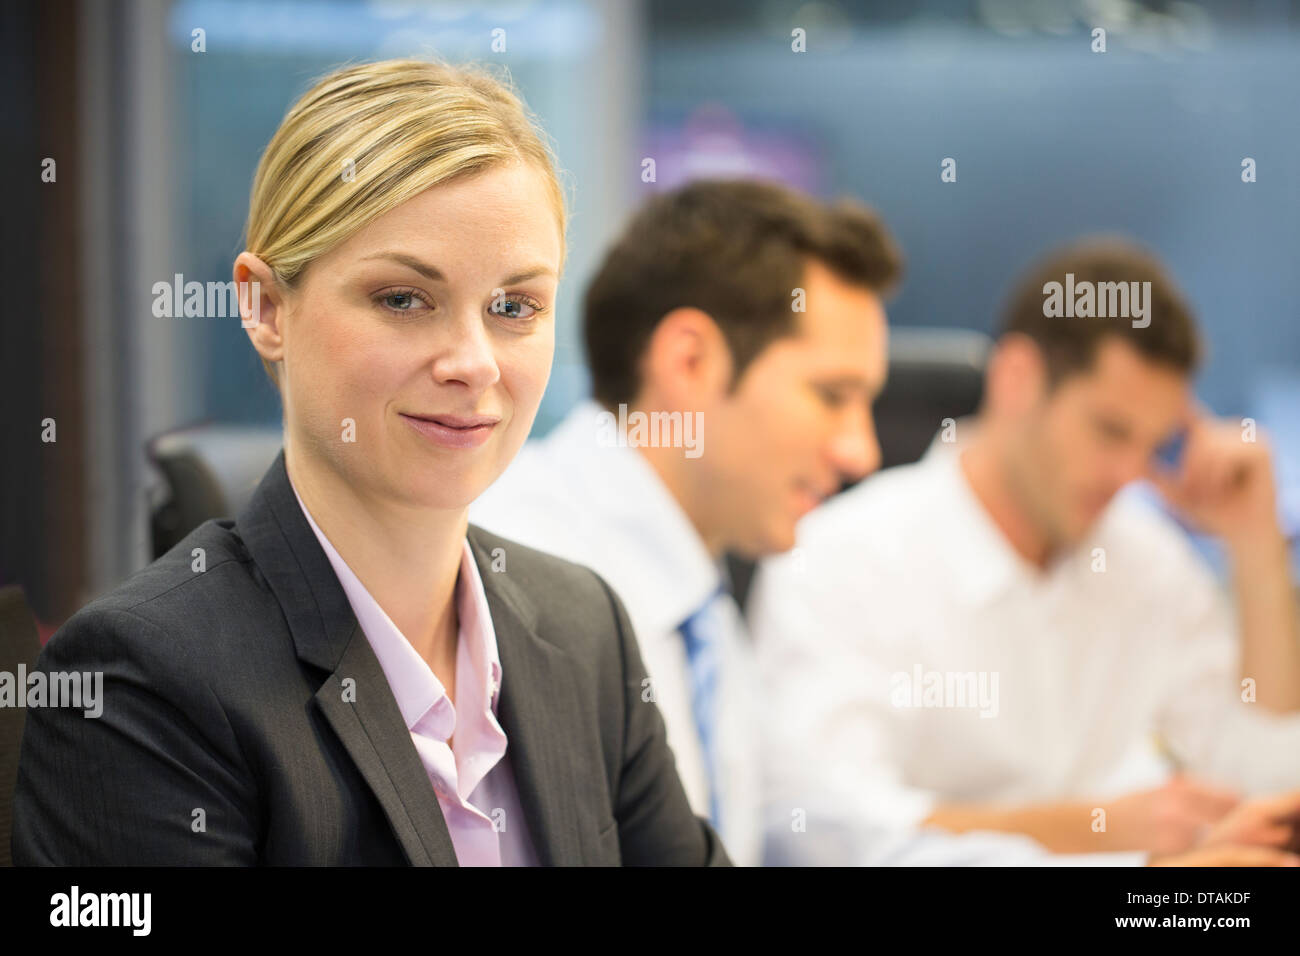 Portrait of a businesswoman smiling in a meeting, looking camera Stock Photo